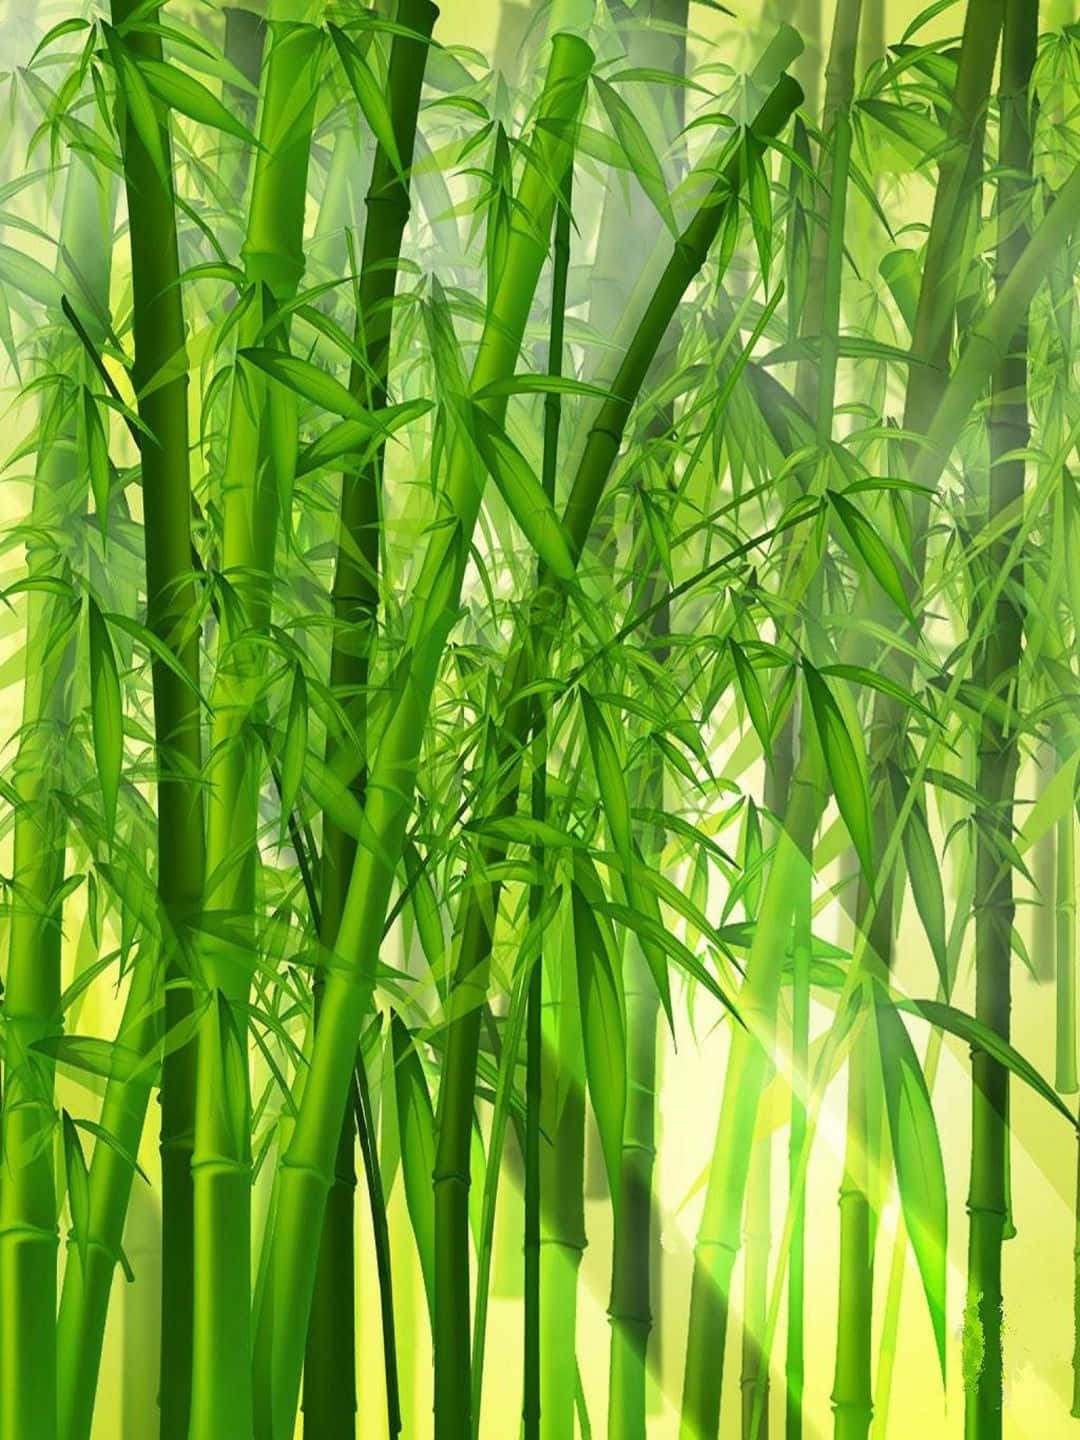 1440p Bamboo Background Painting Of Bamboo Trees